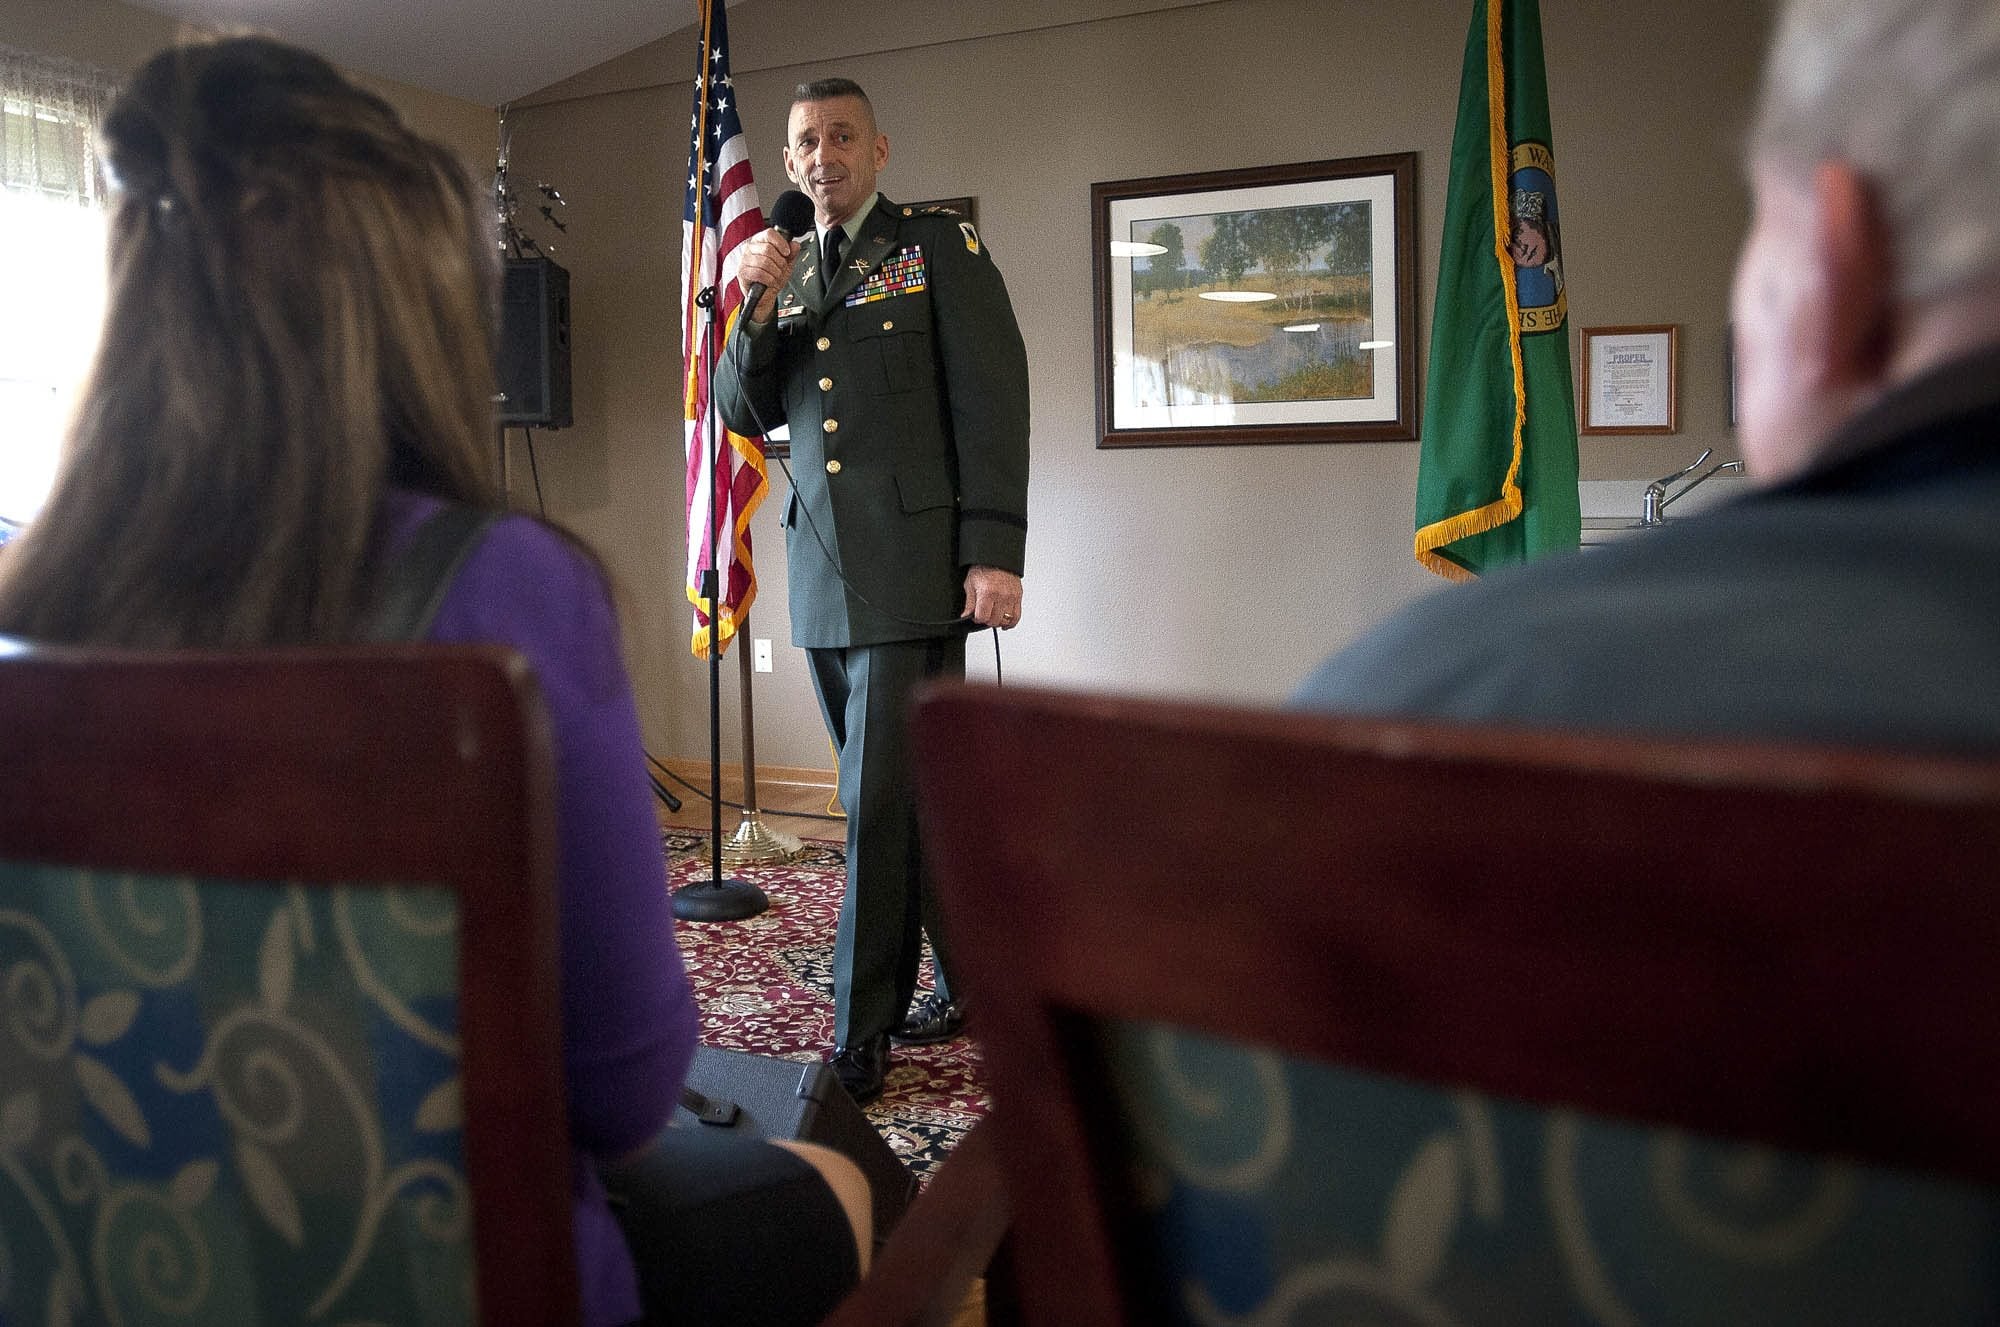 Zachary Kaufman/The Columbian
Col. Daniel Kern sings to honor three World War II veterans who live at Mountainview House Assisted Living in Camas.